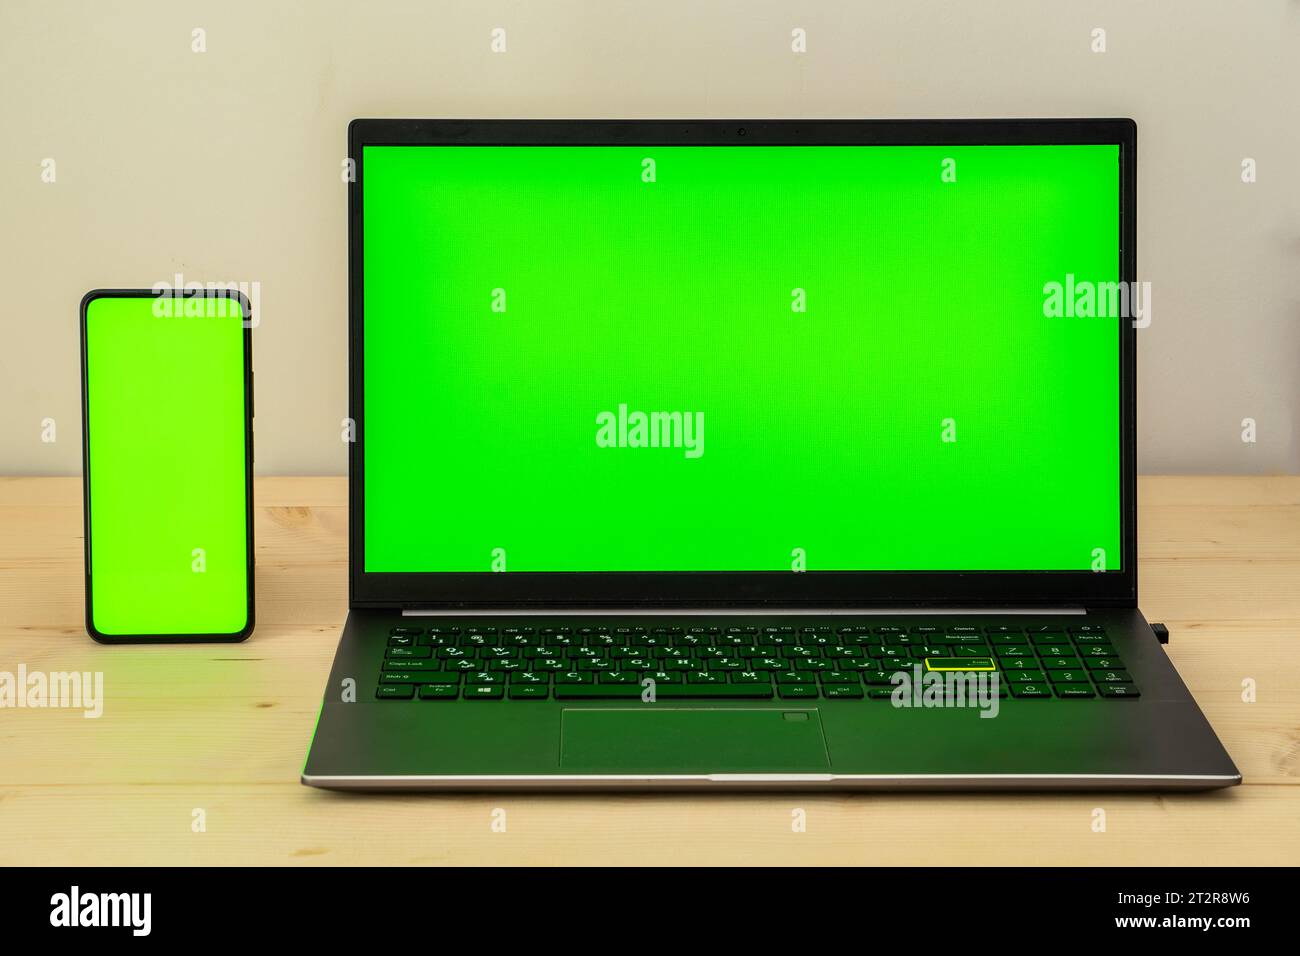 Photo of laptop and smartphone on wooden desk showing green screen. Stock Photo